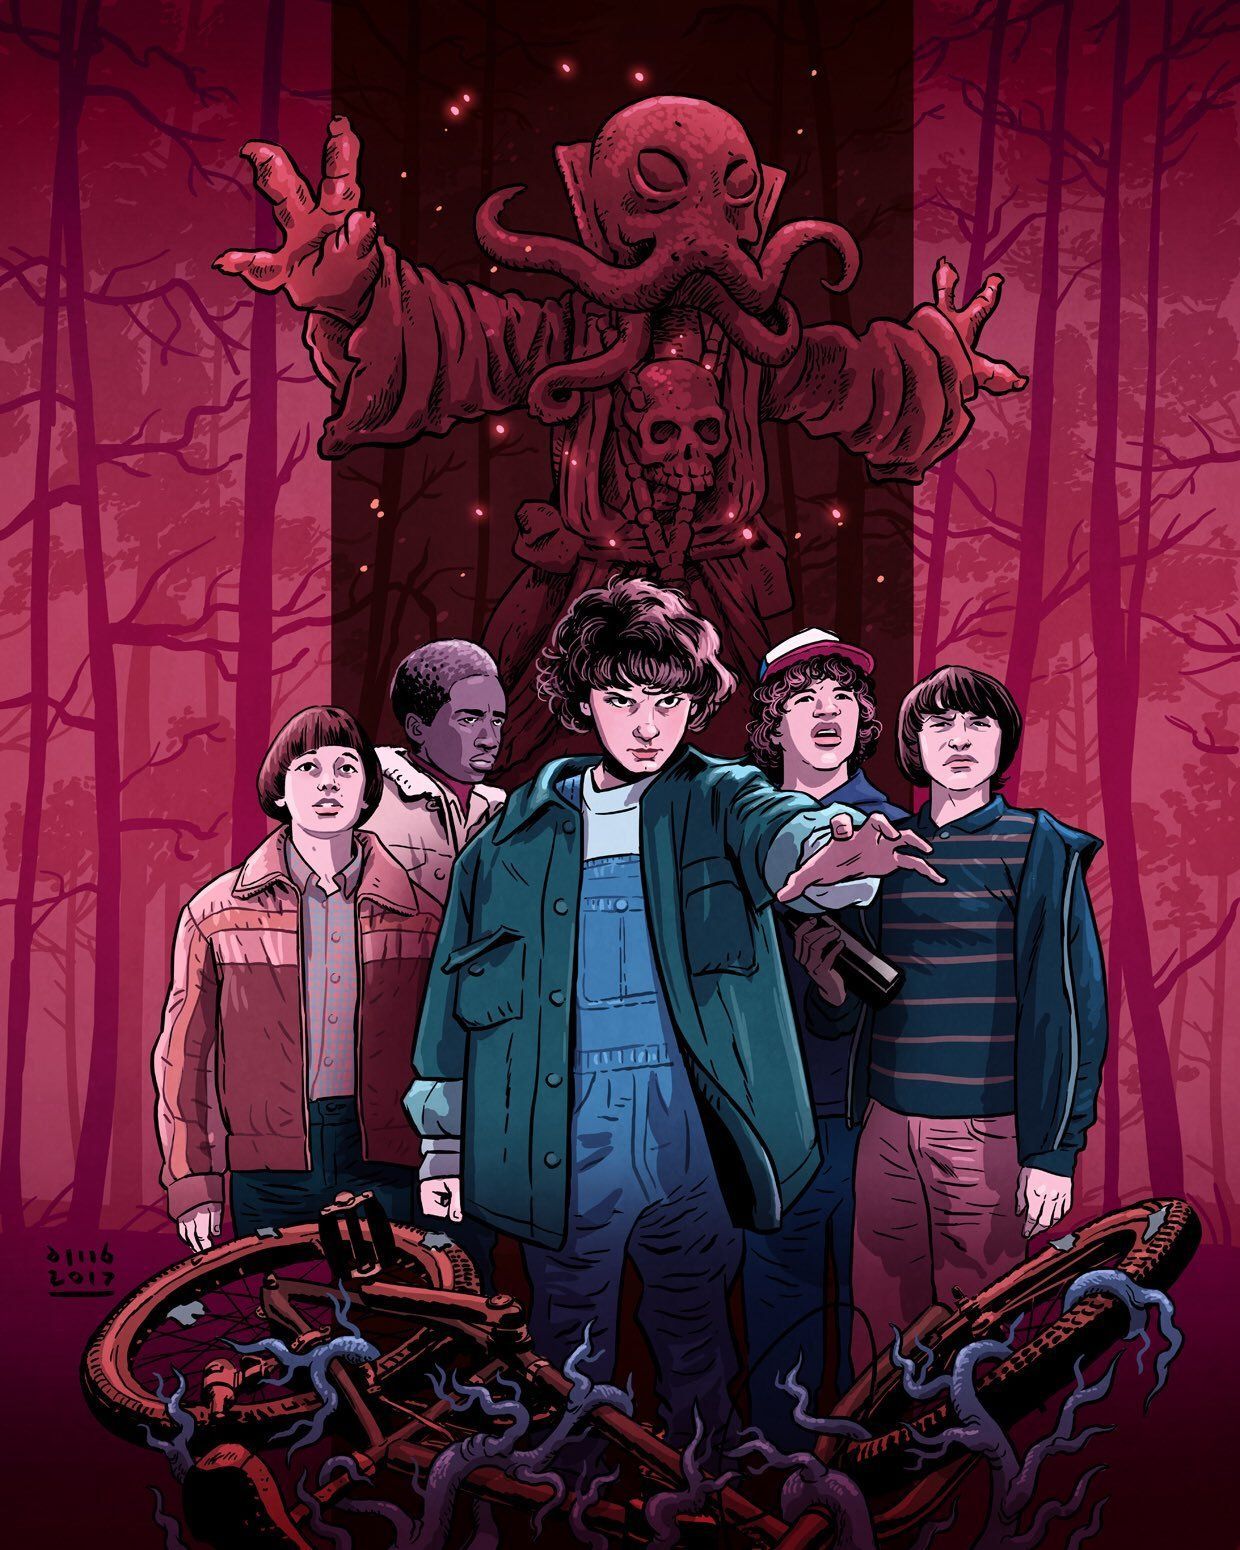 HD Stranger things Phone Wallpaper objective is to serve astonishing HD Wallpaper to many Stran. Stranger things poster, Stranger things, Stranger things fanart